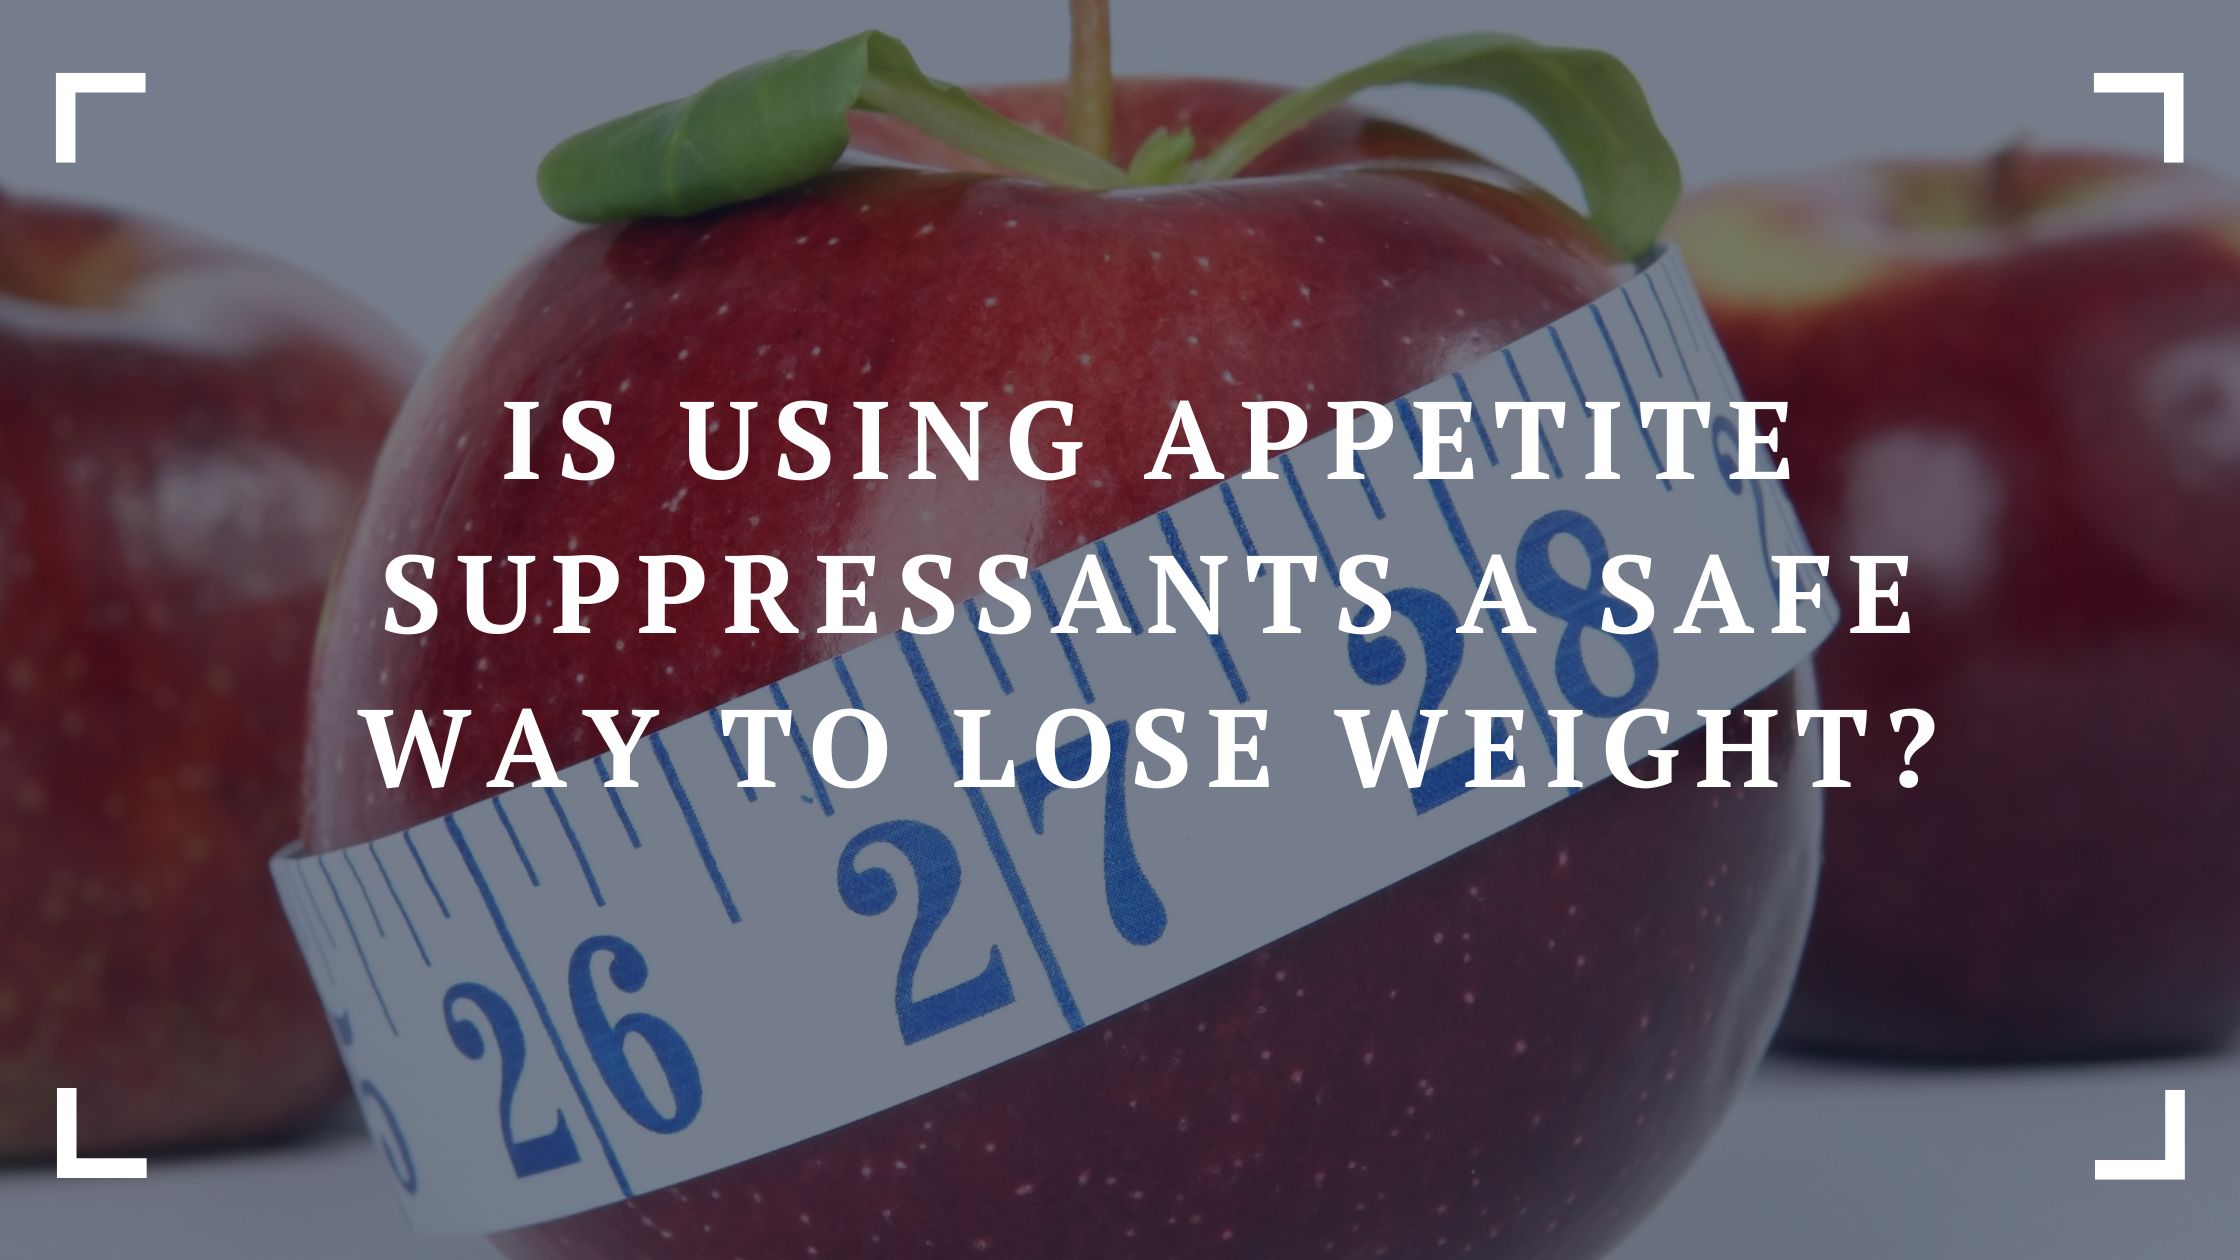 is using appetite suppressants a safe way to lose weight